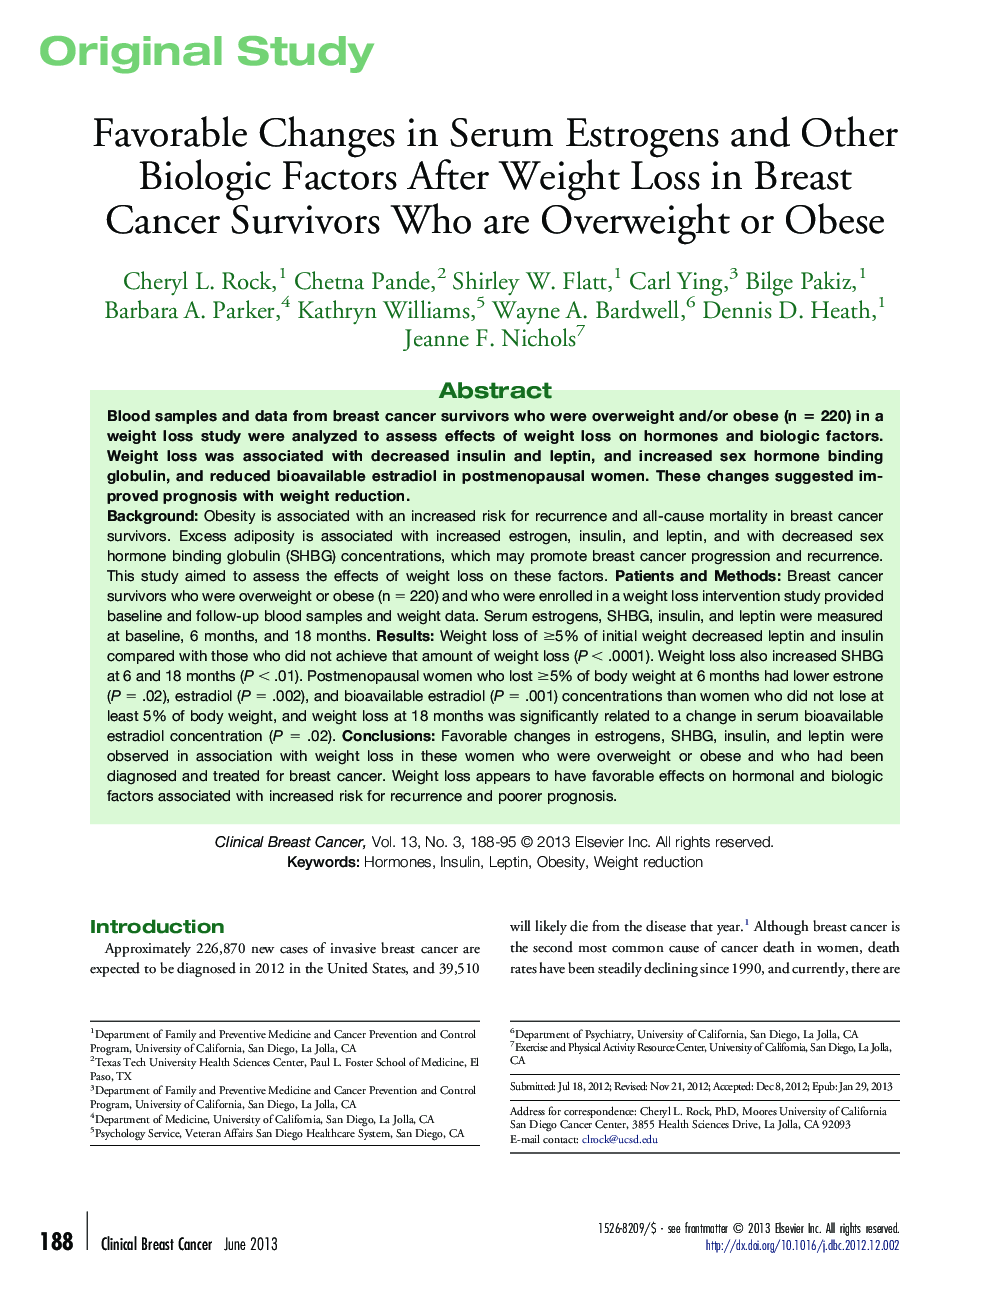 Favorable Changes in Serum Estrogens and Other Biologic Factors After Weight Loss in Breast Cancer Survivors Who are Overweight or Obese